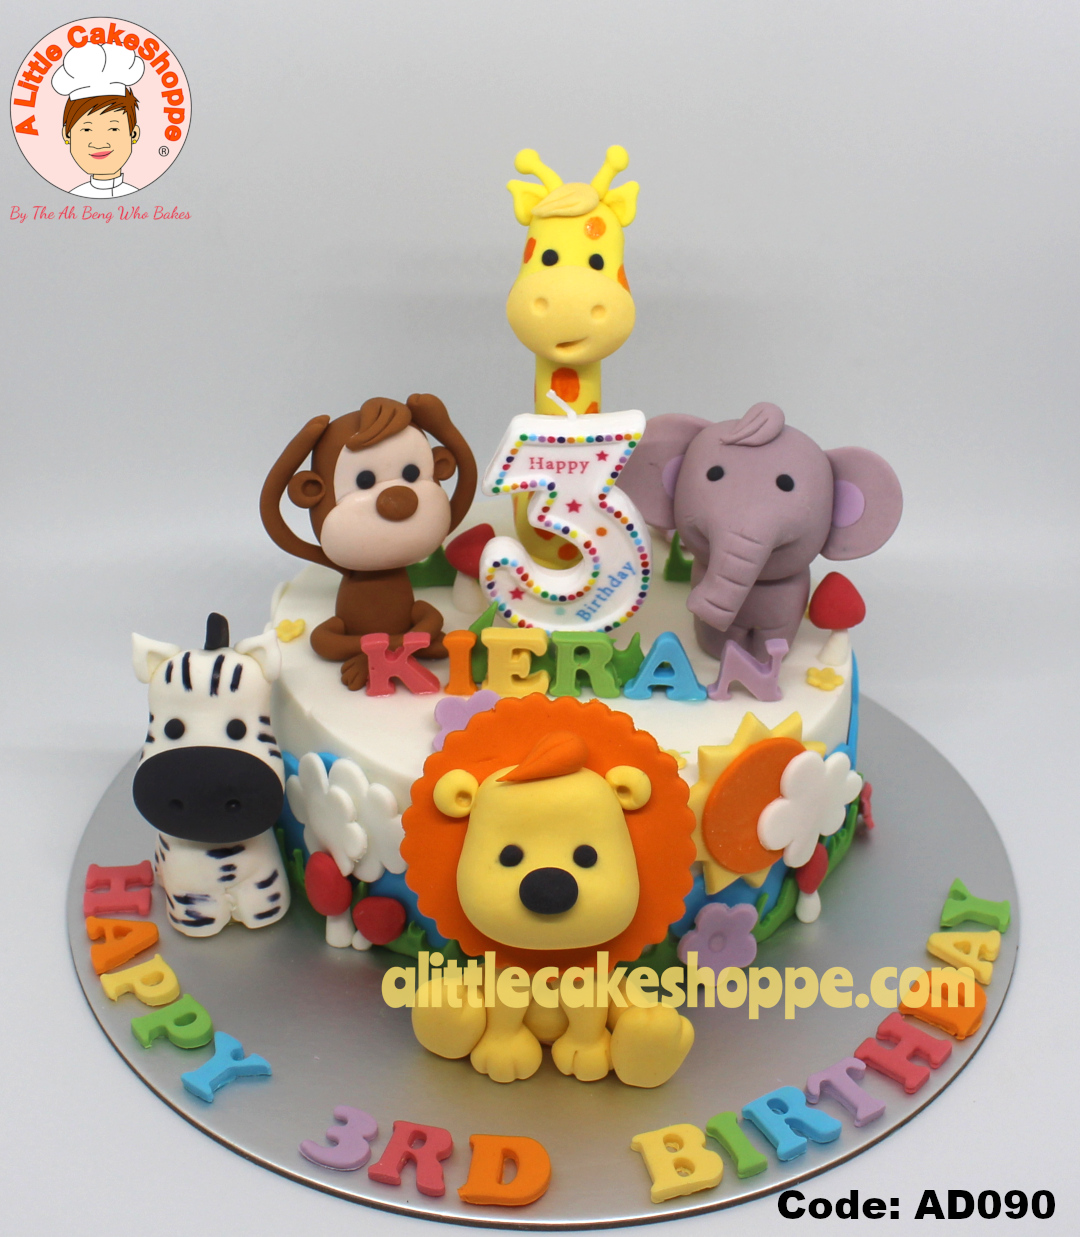 Best Cake Shop Singapore Delivery Best Customised Cake Shop Singapore customise cake custom cake 2D 3D birthday cake cupcakes desserts wedding corporate events anniversary 1st birthday 21st birthday fondant fresh cream buttercream cakes alittlecakeshoppe a little cake shoppe compliments review singapore bakers SG cake shop cakeshop ah beng who bakes sgbakes novelty cakes sgcakes licensed sfa nea cake delivery celebration cakes kids birthday cake surprise cake adult children animal safari